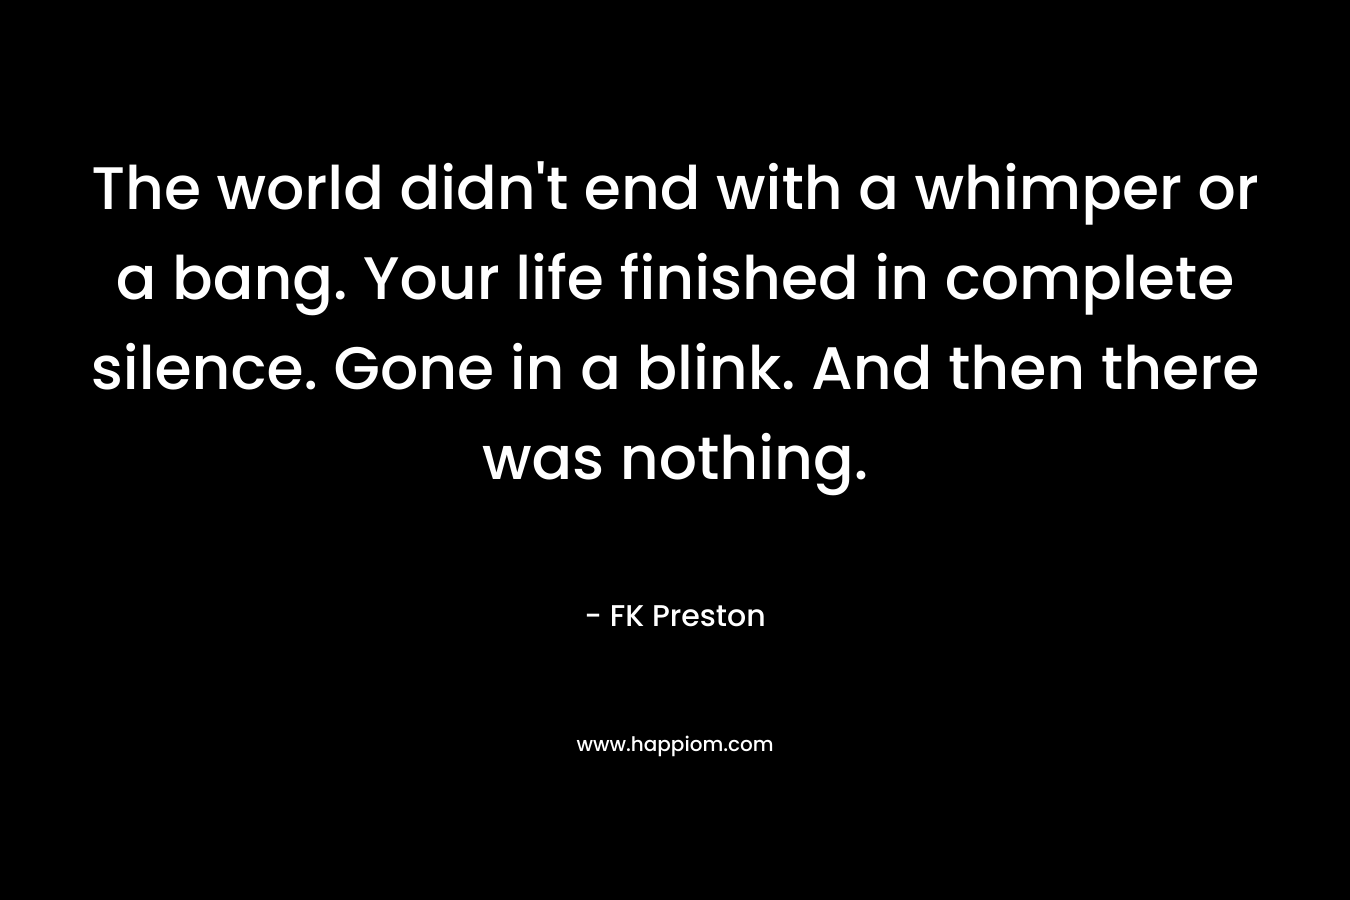 The world didn’t end with a whimper or a bang. Your life finished in complete silence. Gone in a blink. And then there was nothing. – FK Preston